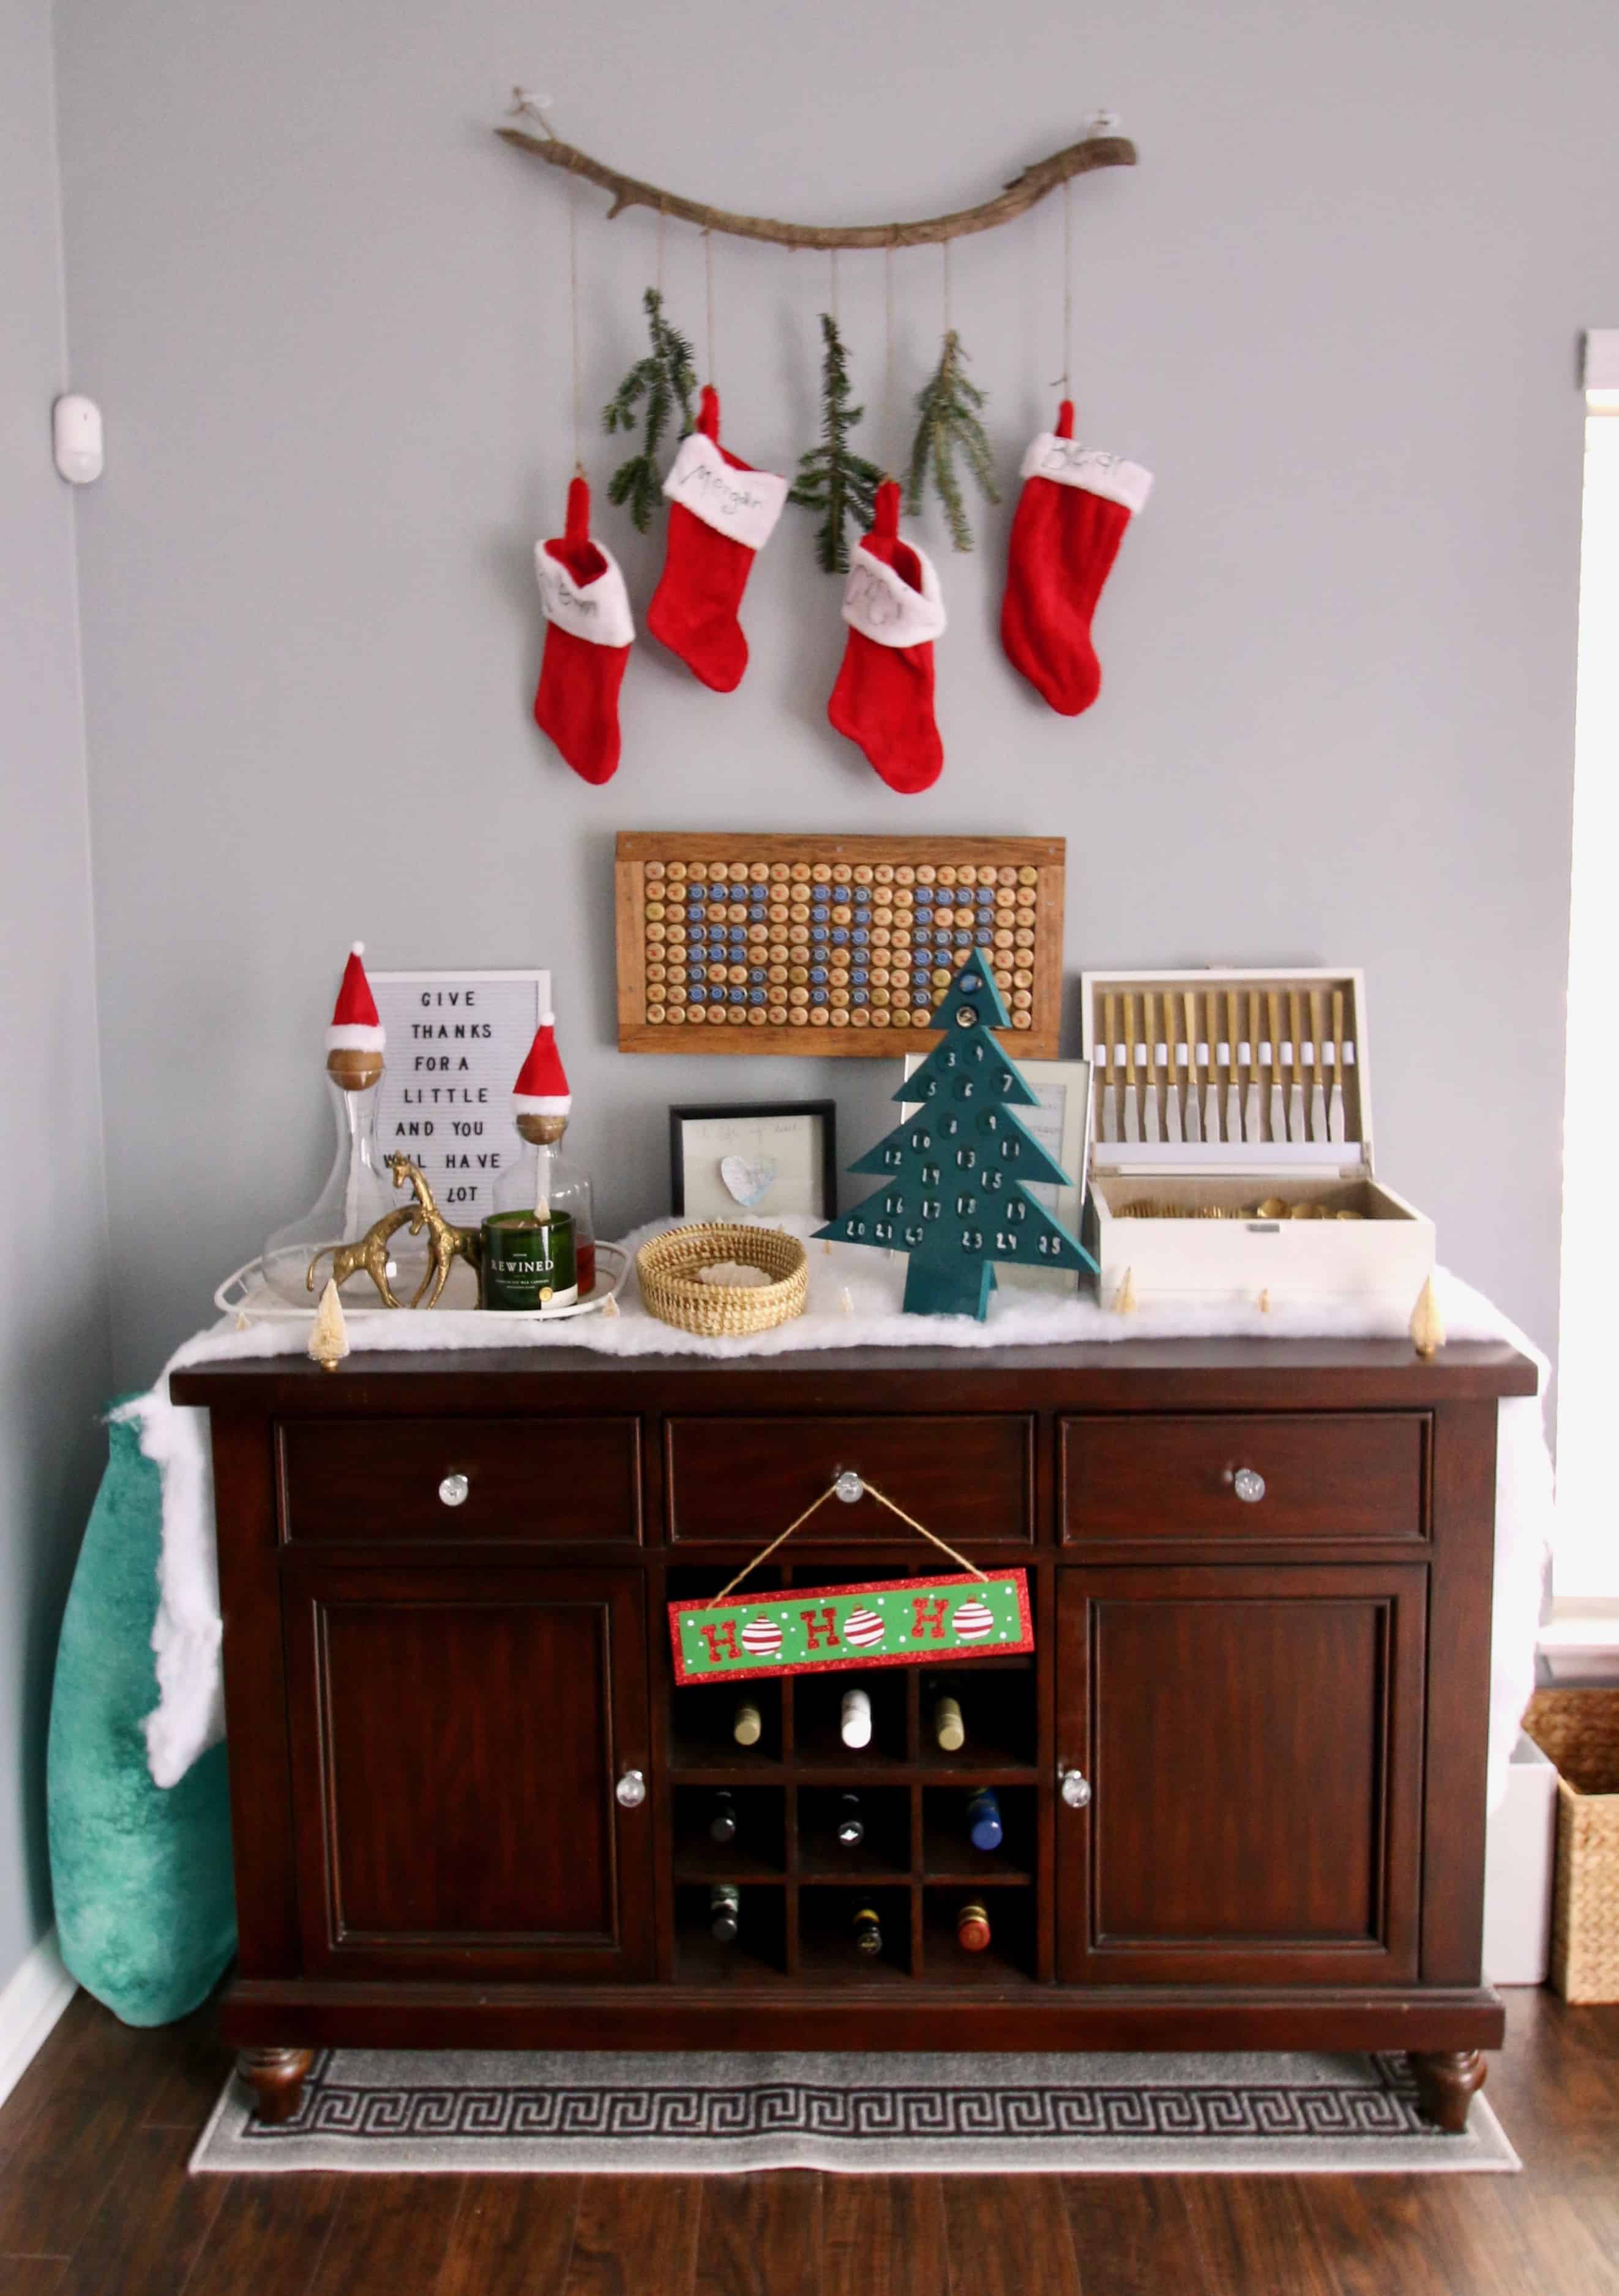 How to Decorate the Kitchen for Christmas (3-Step Formula)